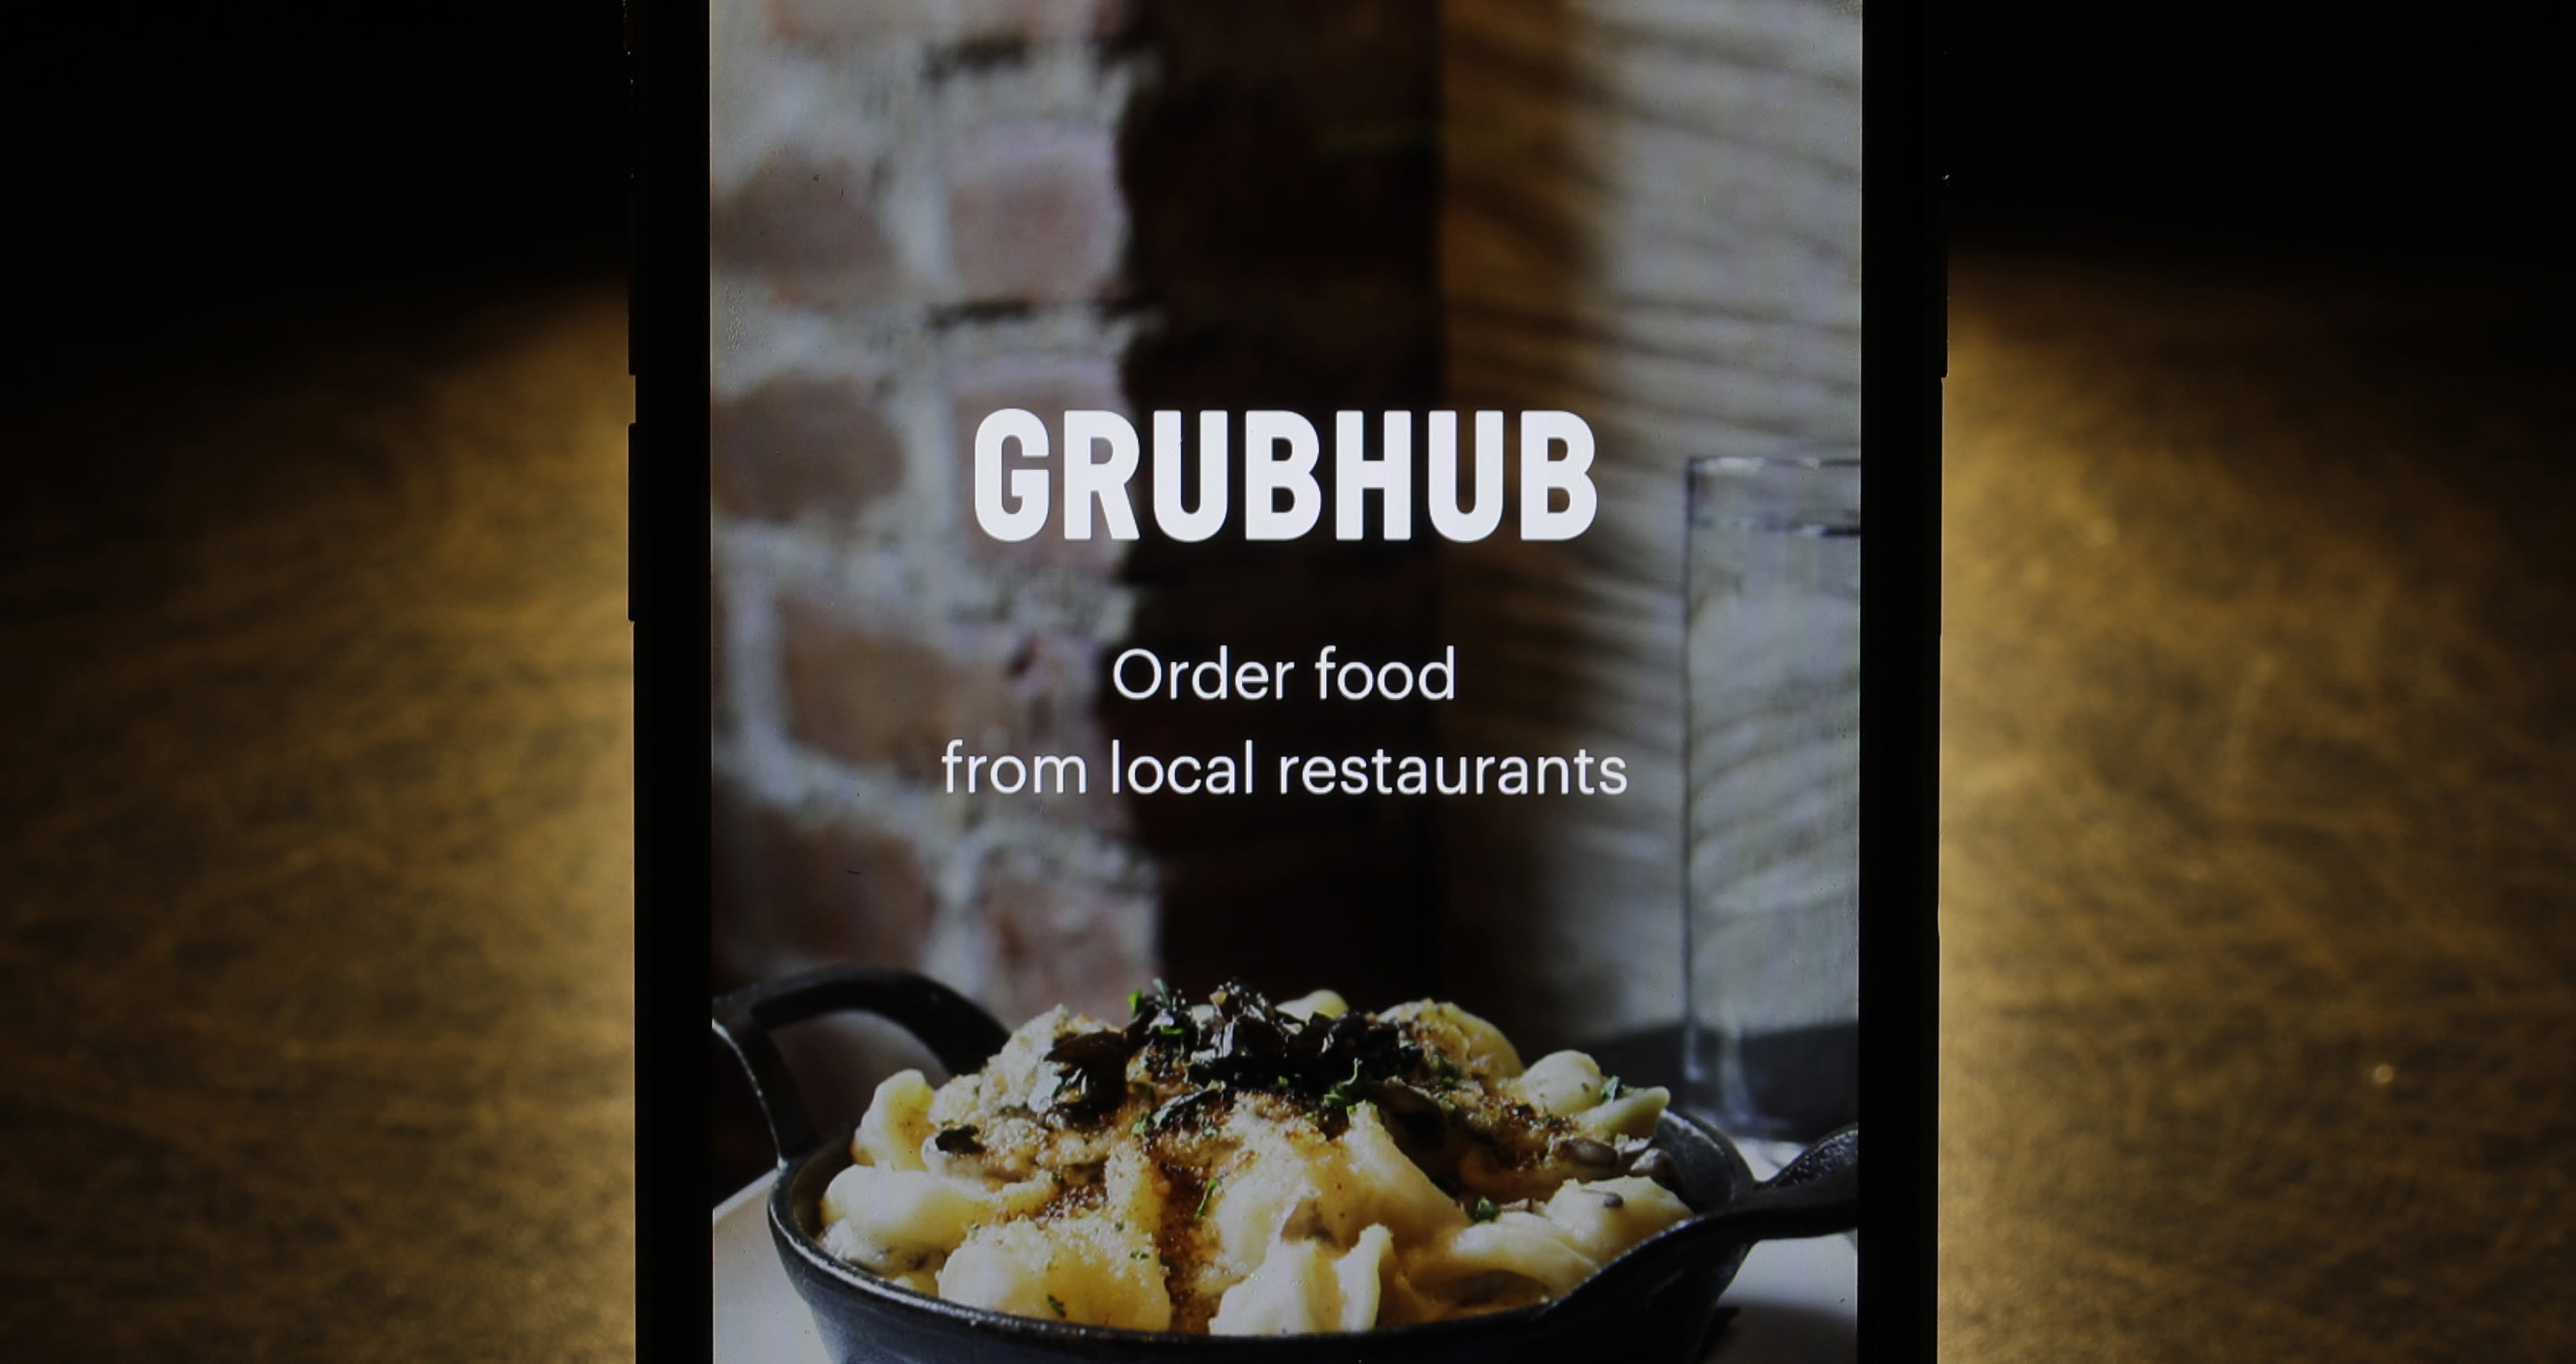 Amazon expands Grubhub deal in food delivery push